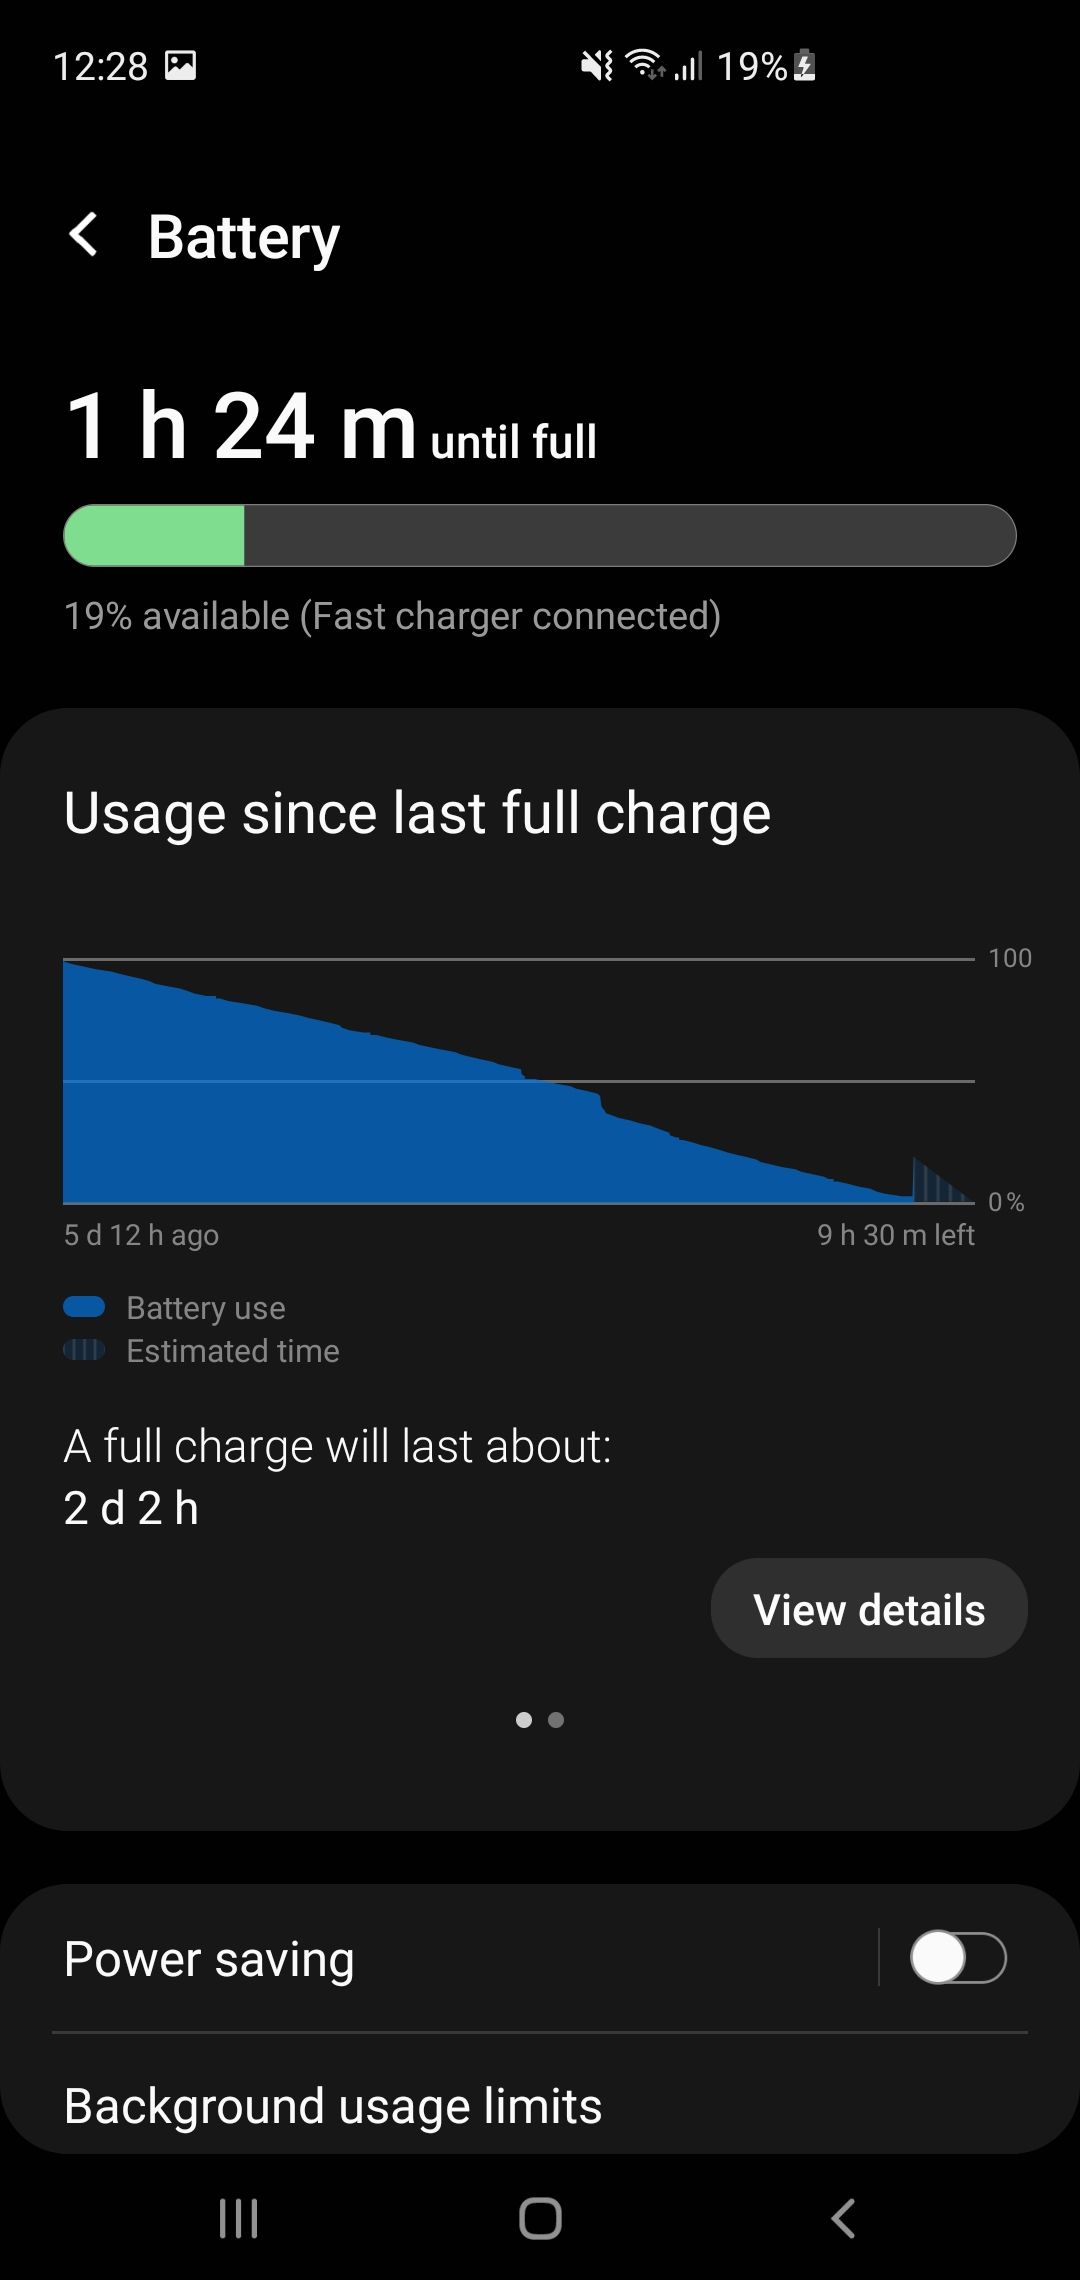 Battery of Android device